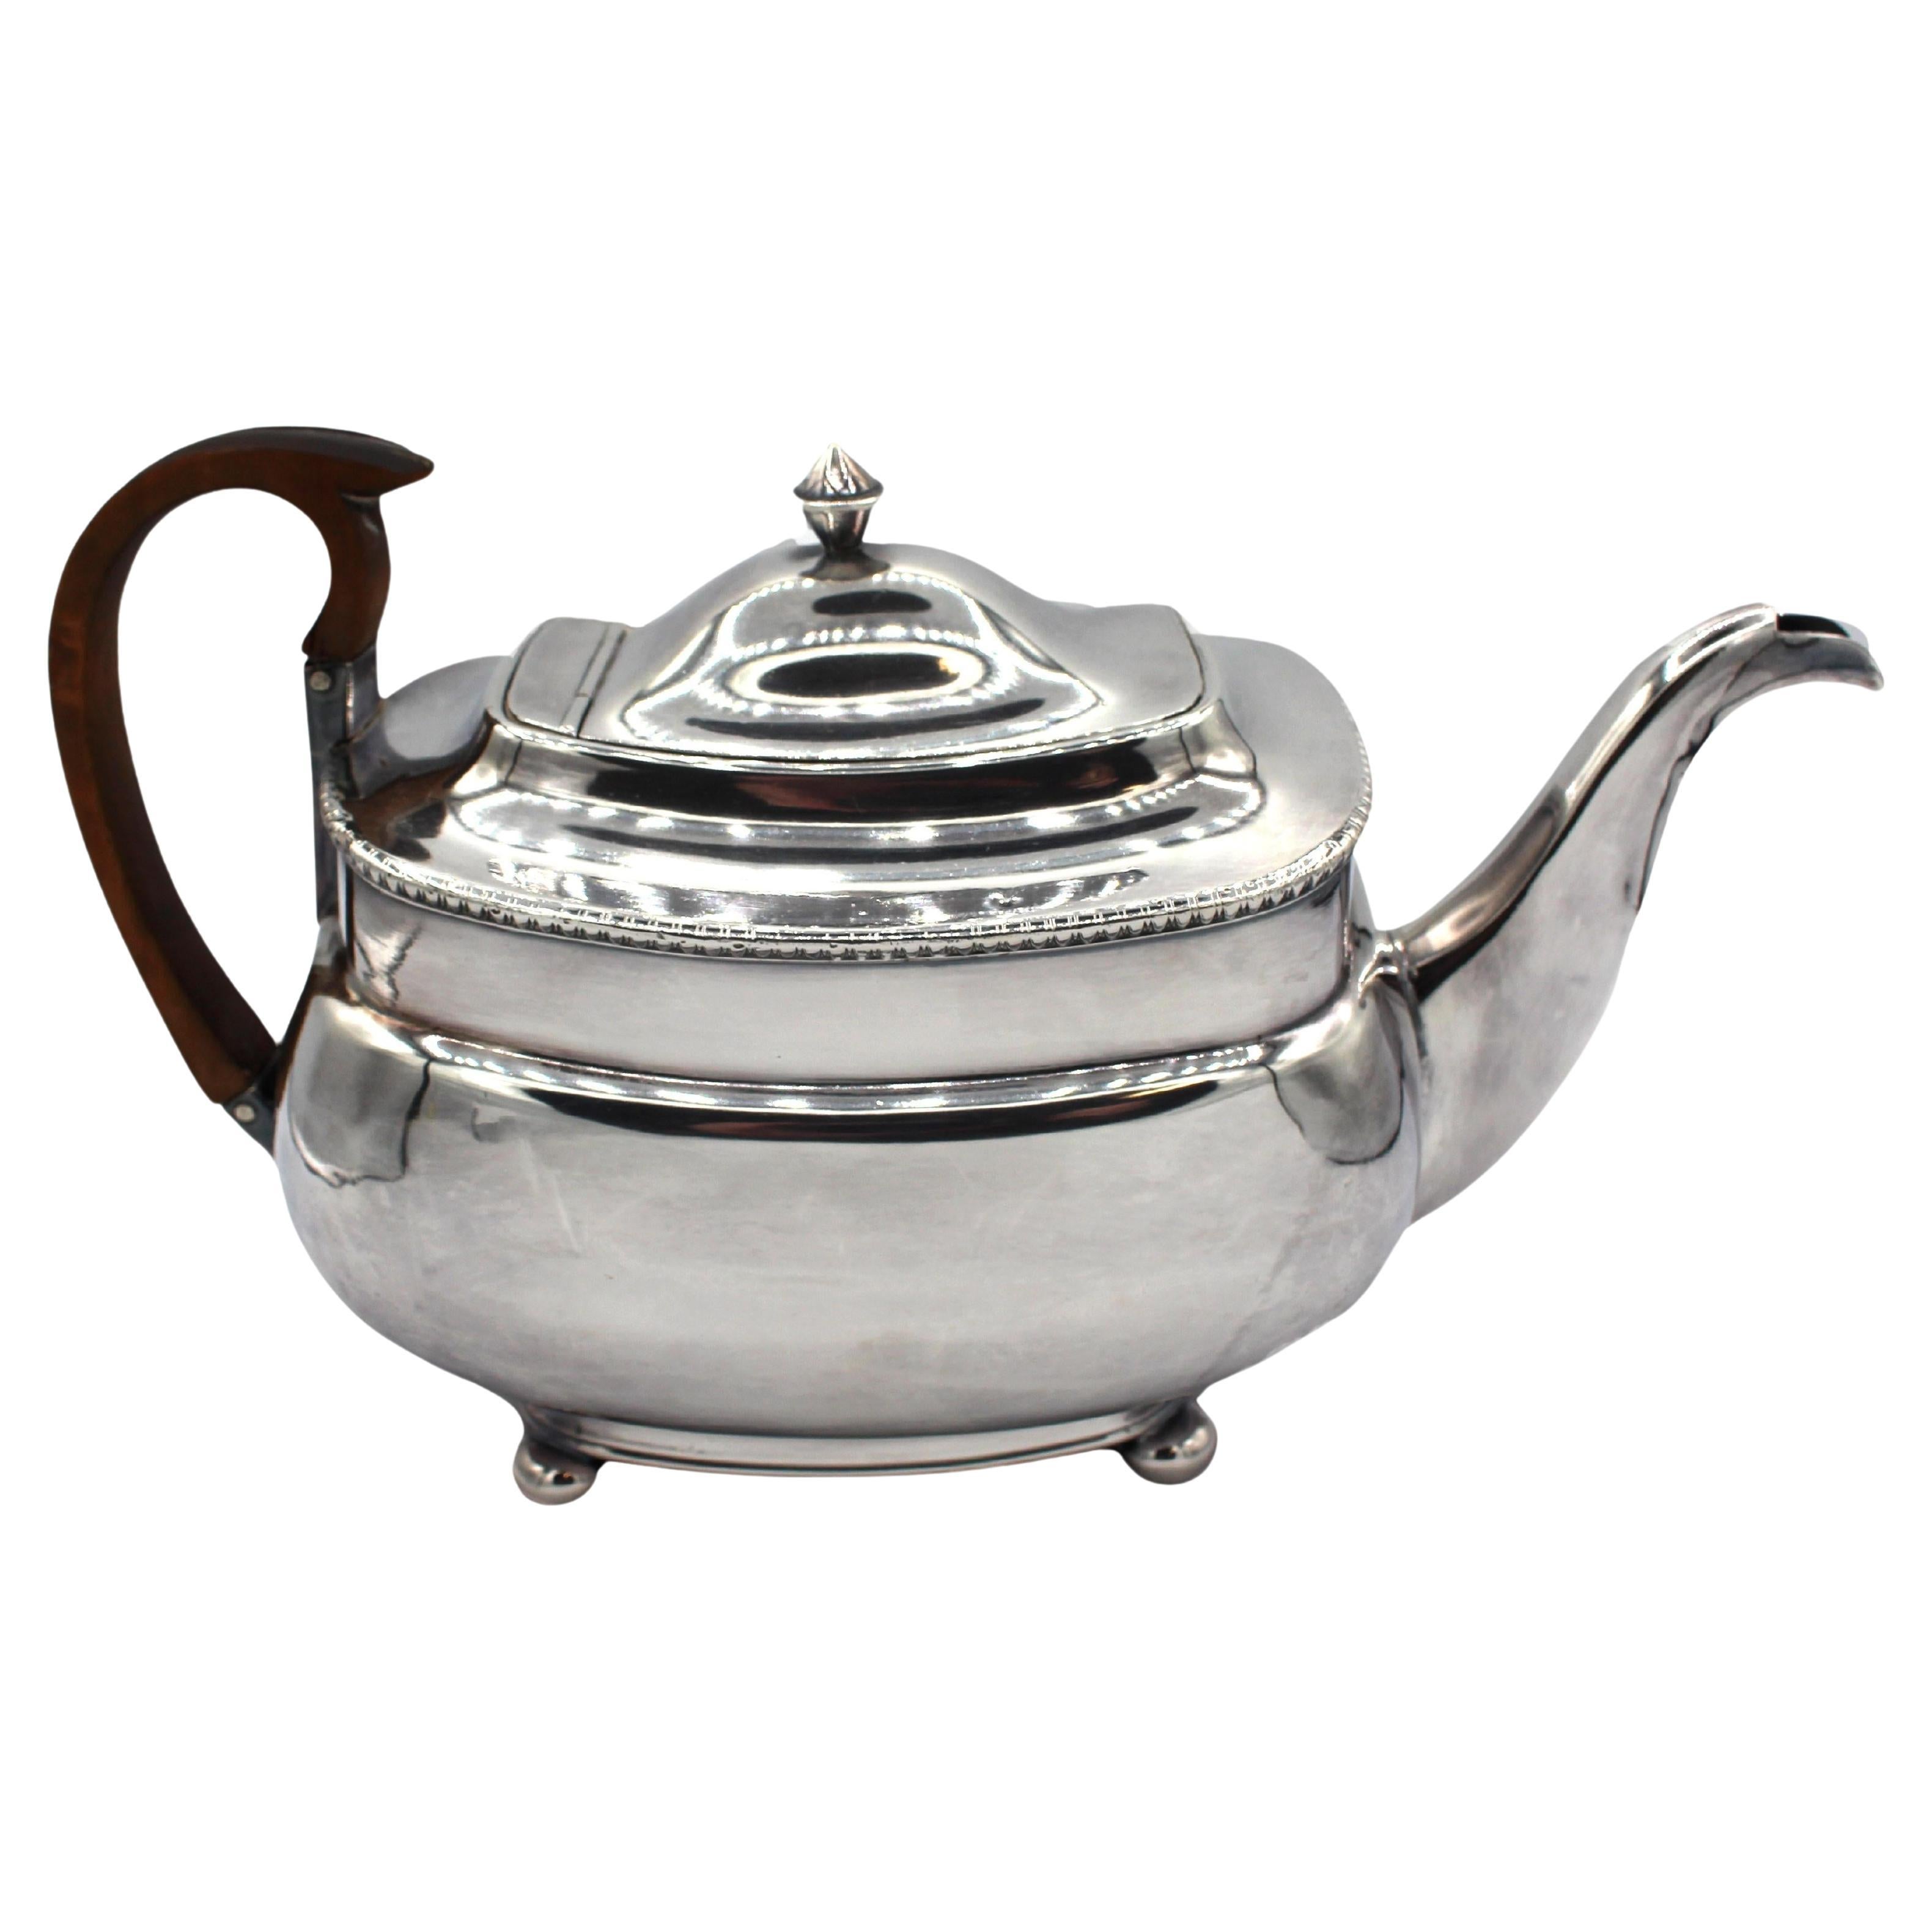 Old Sheffield Plate Tea Pot with Pearwood Handle, circa 1820, English For Sale